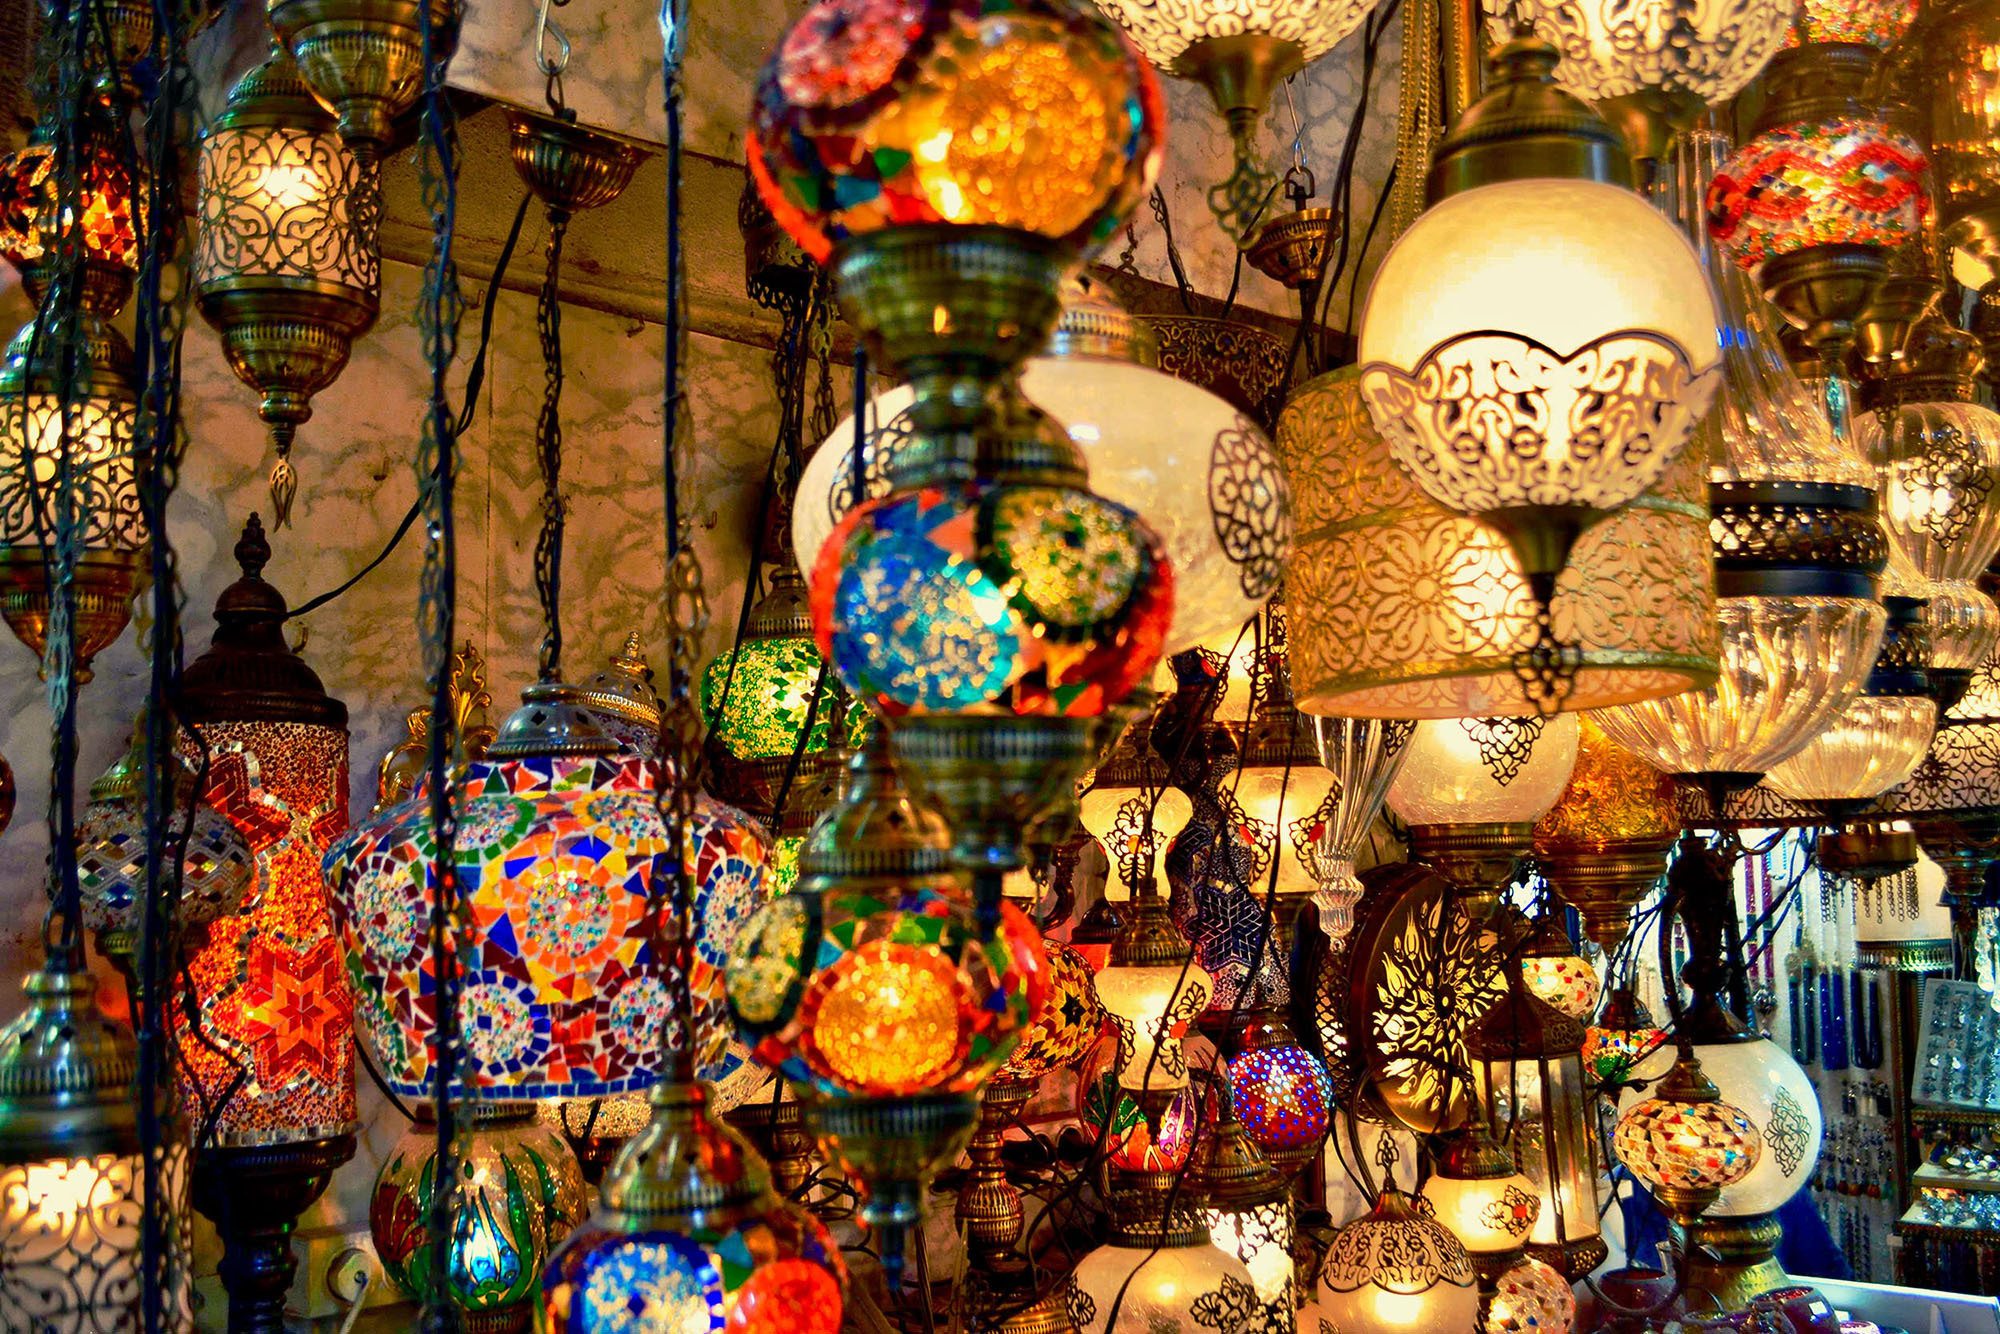 Lanterns hanging in a store in the Grand Bazaar Istanbul Turkey